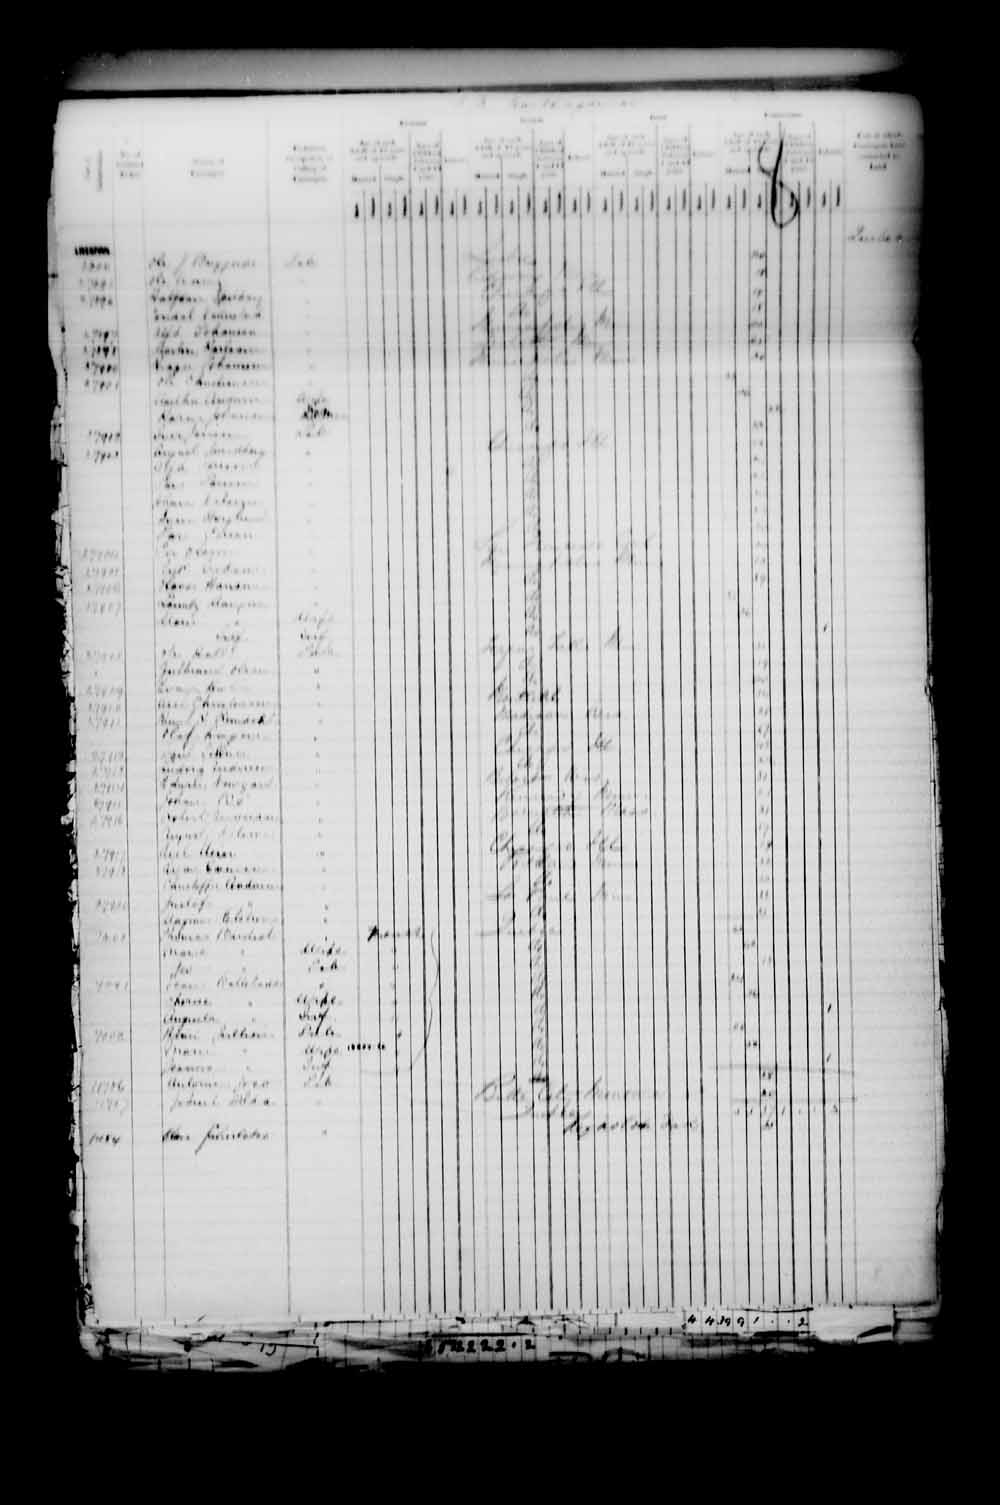 Digitized page of Passenger Lists for Image No.: e003546740